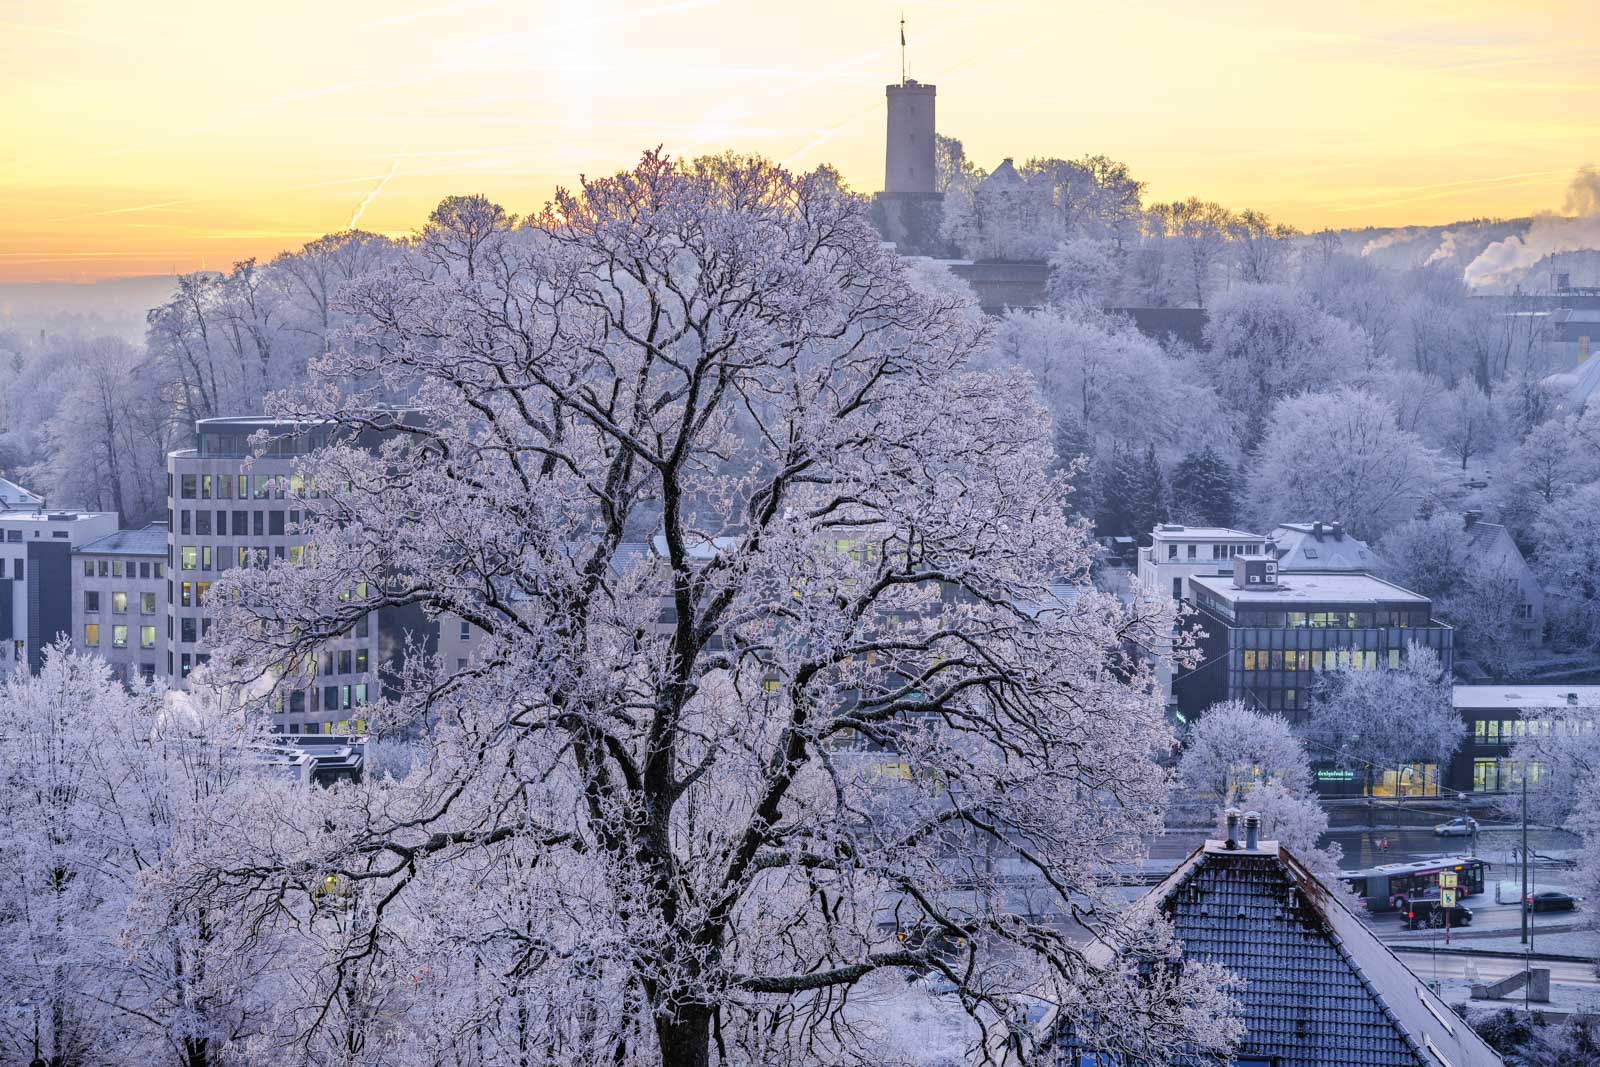 Hoarfrost covered trees in front of Sparrenburg castle (Bielefeld, Germany).